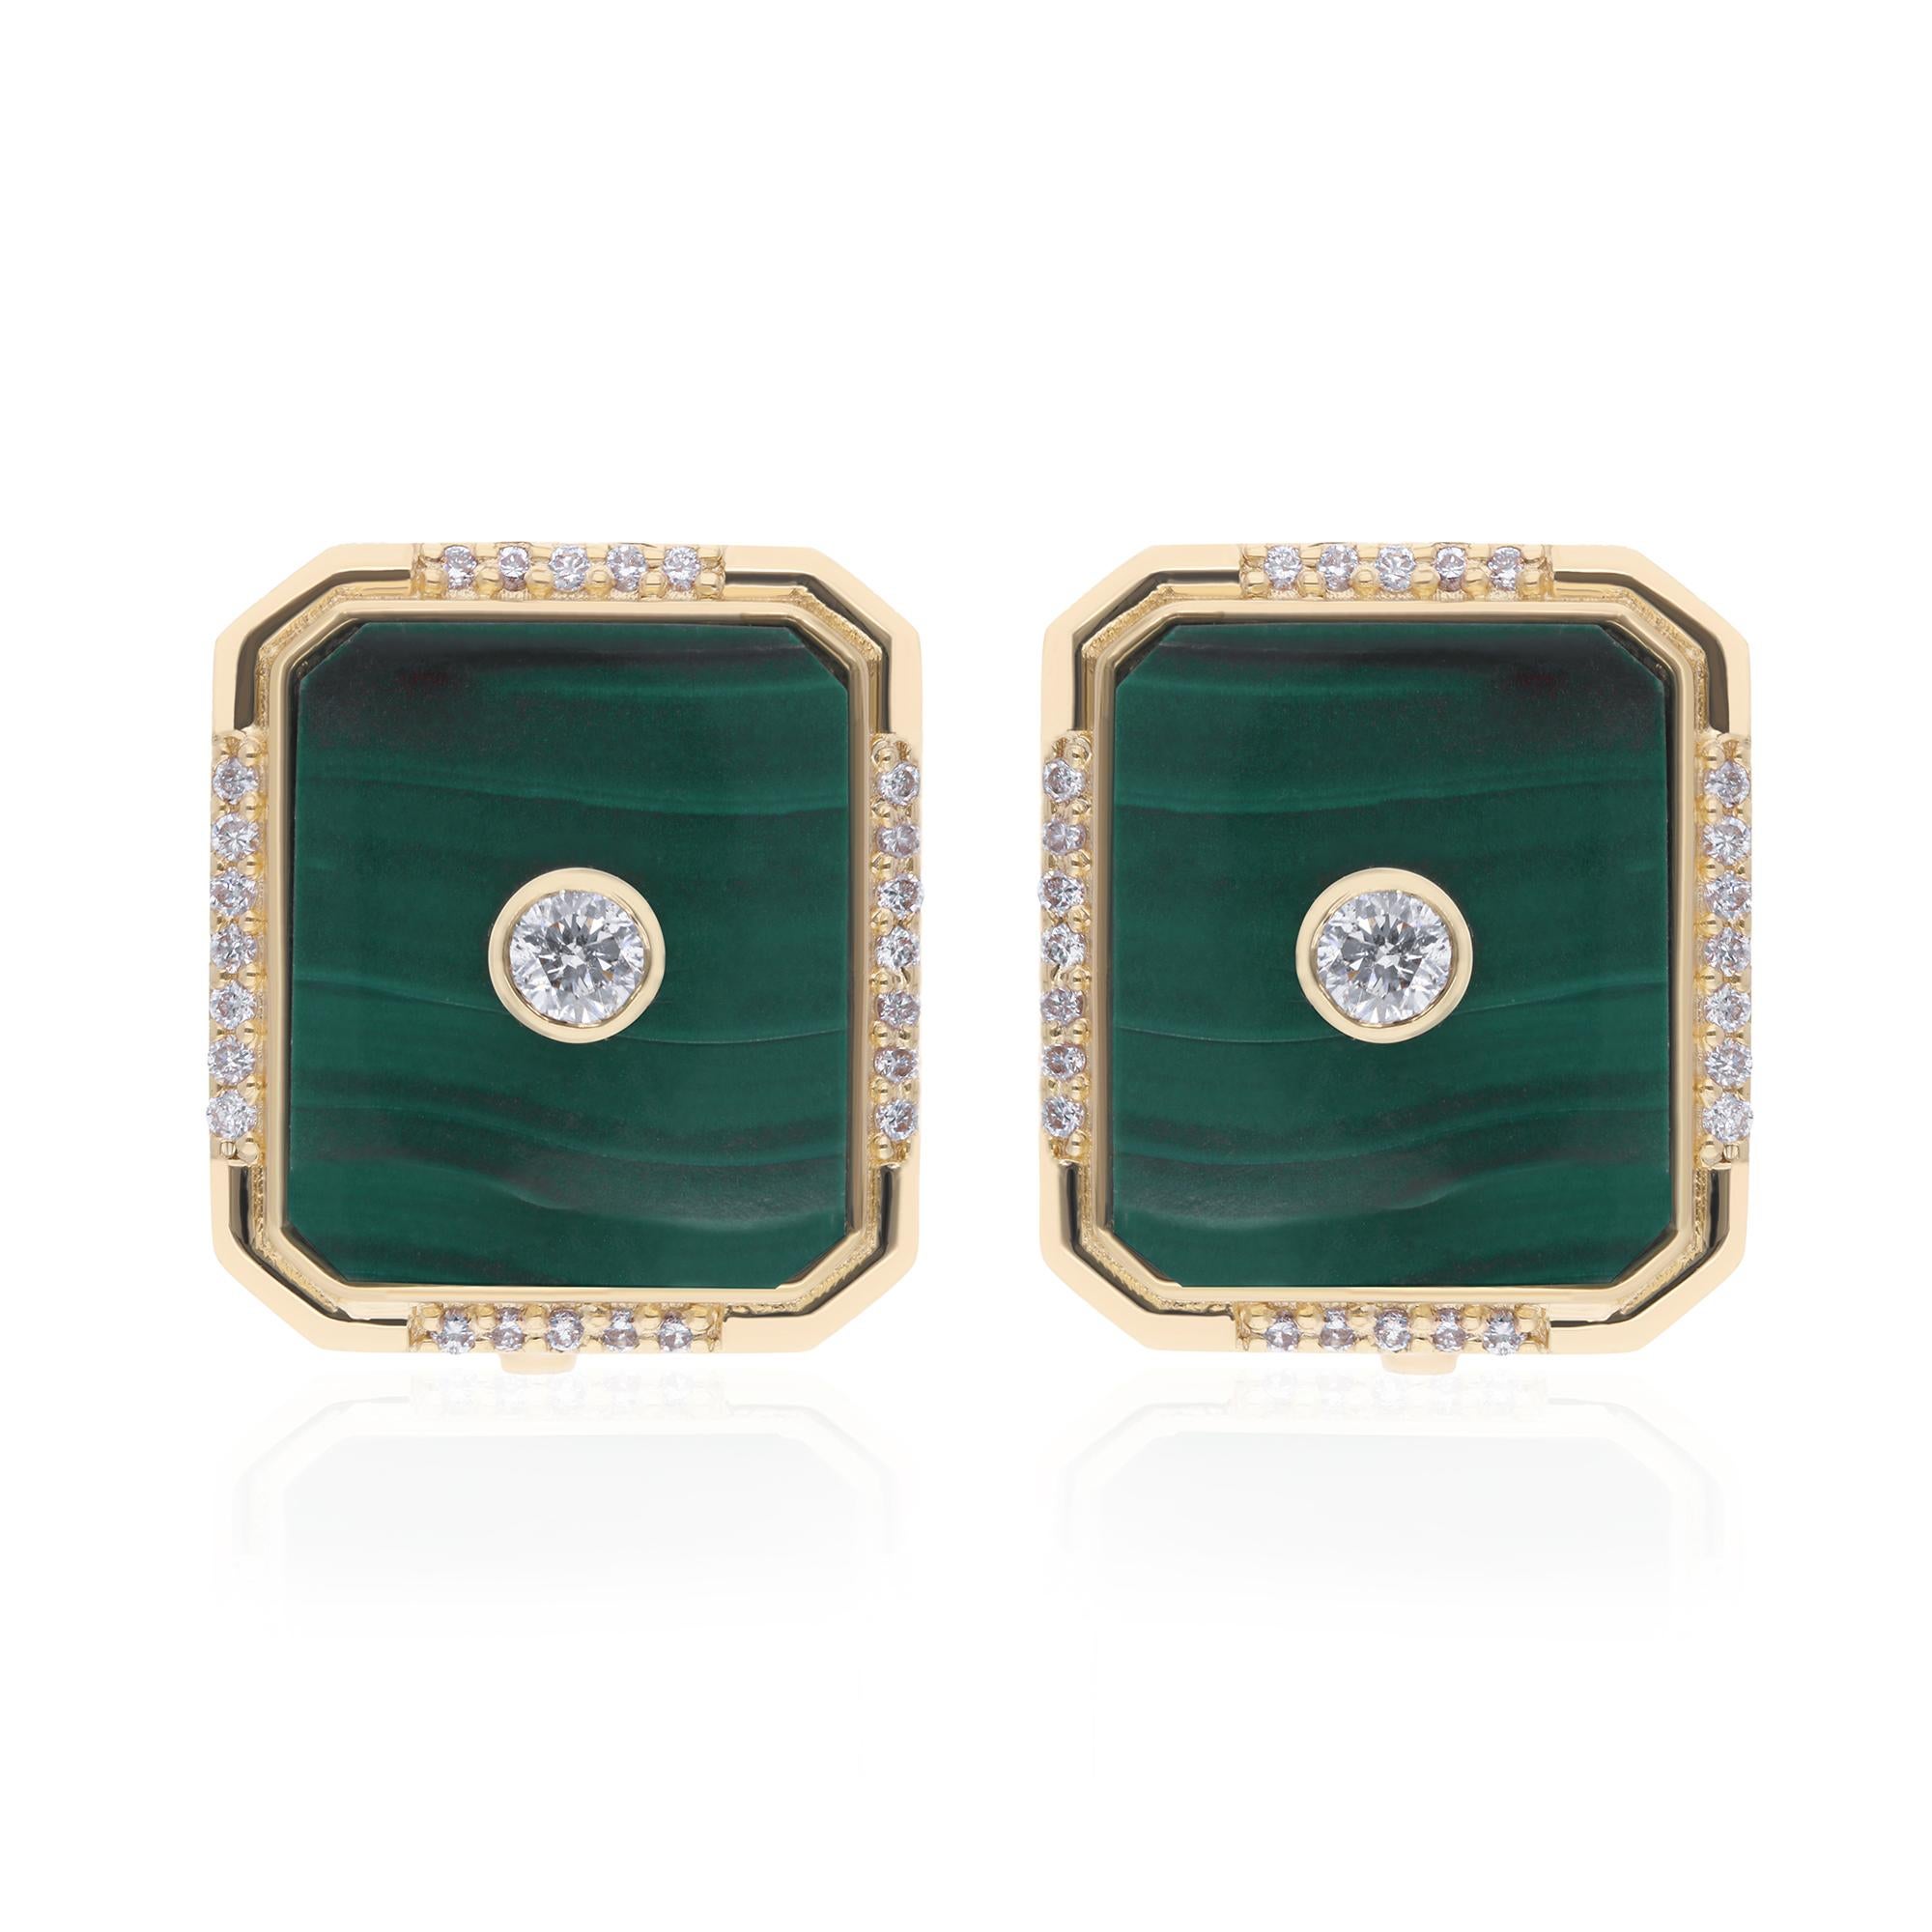 Surrounding the malachite gemstones are delicate diamond pave accents, meticulously set in 18 karat yellow gold to enhance their brilliance and sparkle. Each diamond adds a touch of glamour and sophistication to the earrings, creating a dazzling